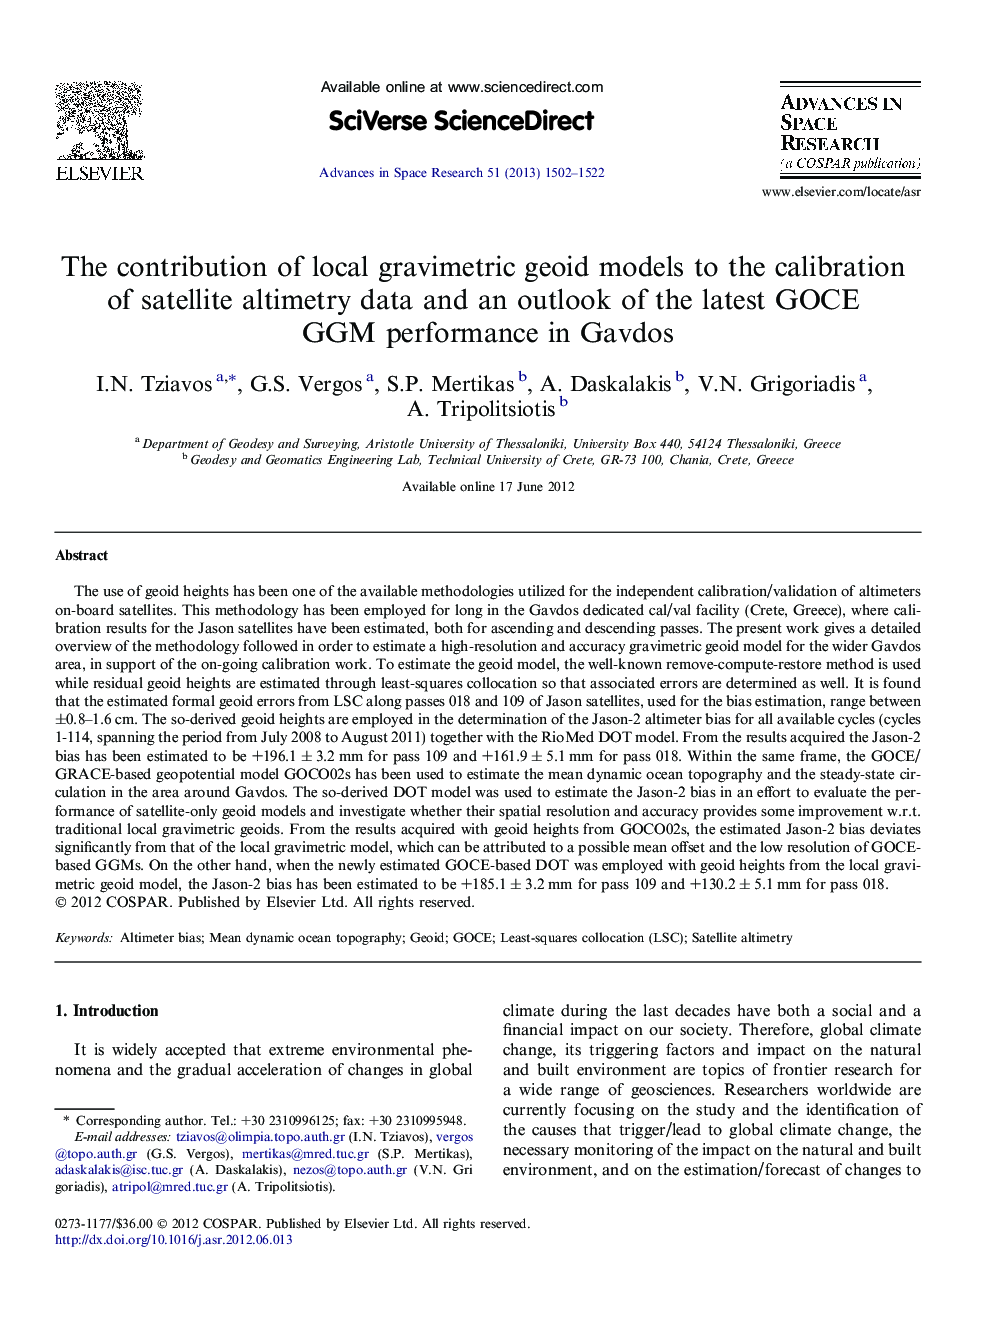 The contribution of local gravimetric geoid models to the calibration of satellite altimetry data and an outlook of the latest GOCE GGM performance in Gavdos